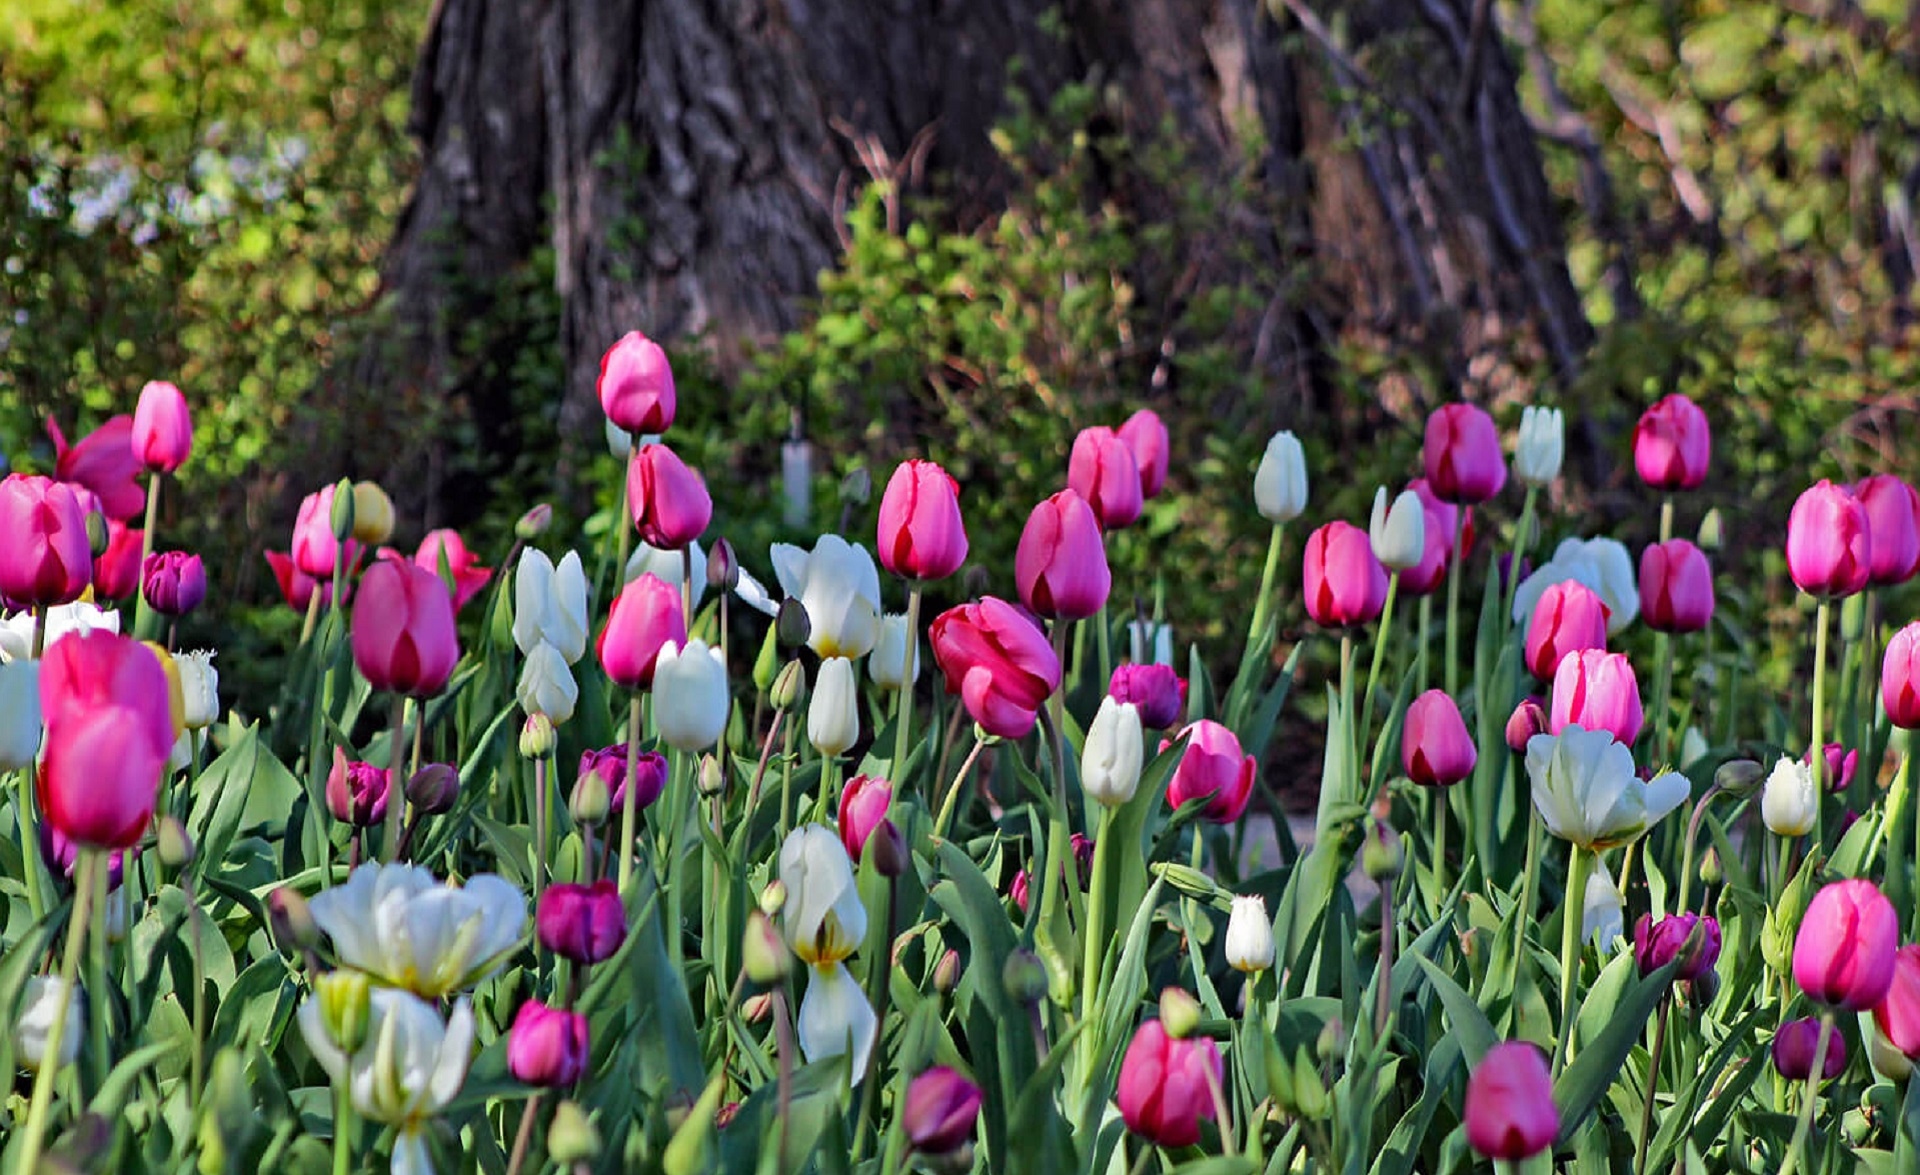 Photography of flowering tulip plants below a tree